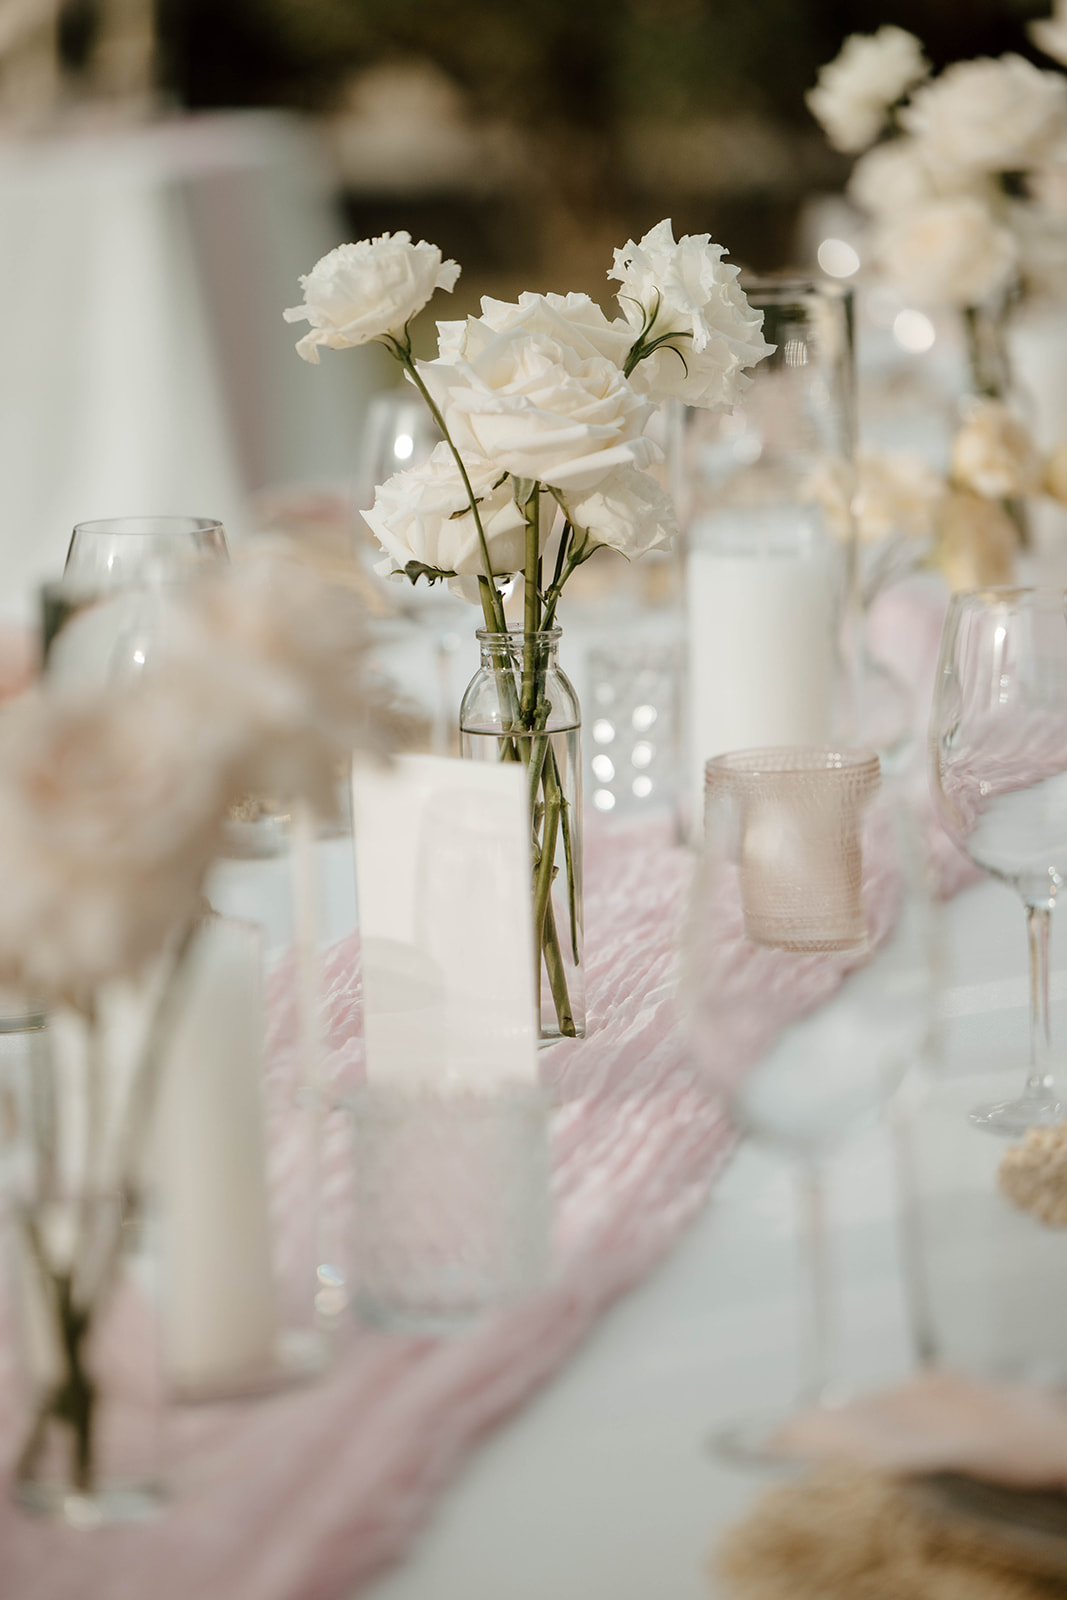 Elegant table setting with white flowers in a glass vase, soft pink textiles, and delicate glassware.